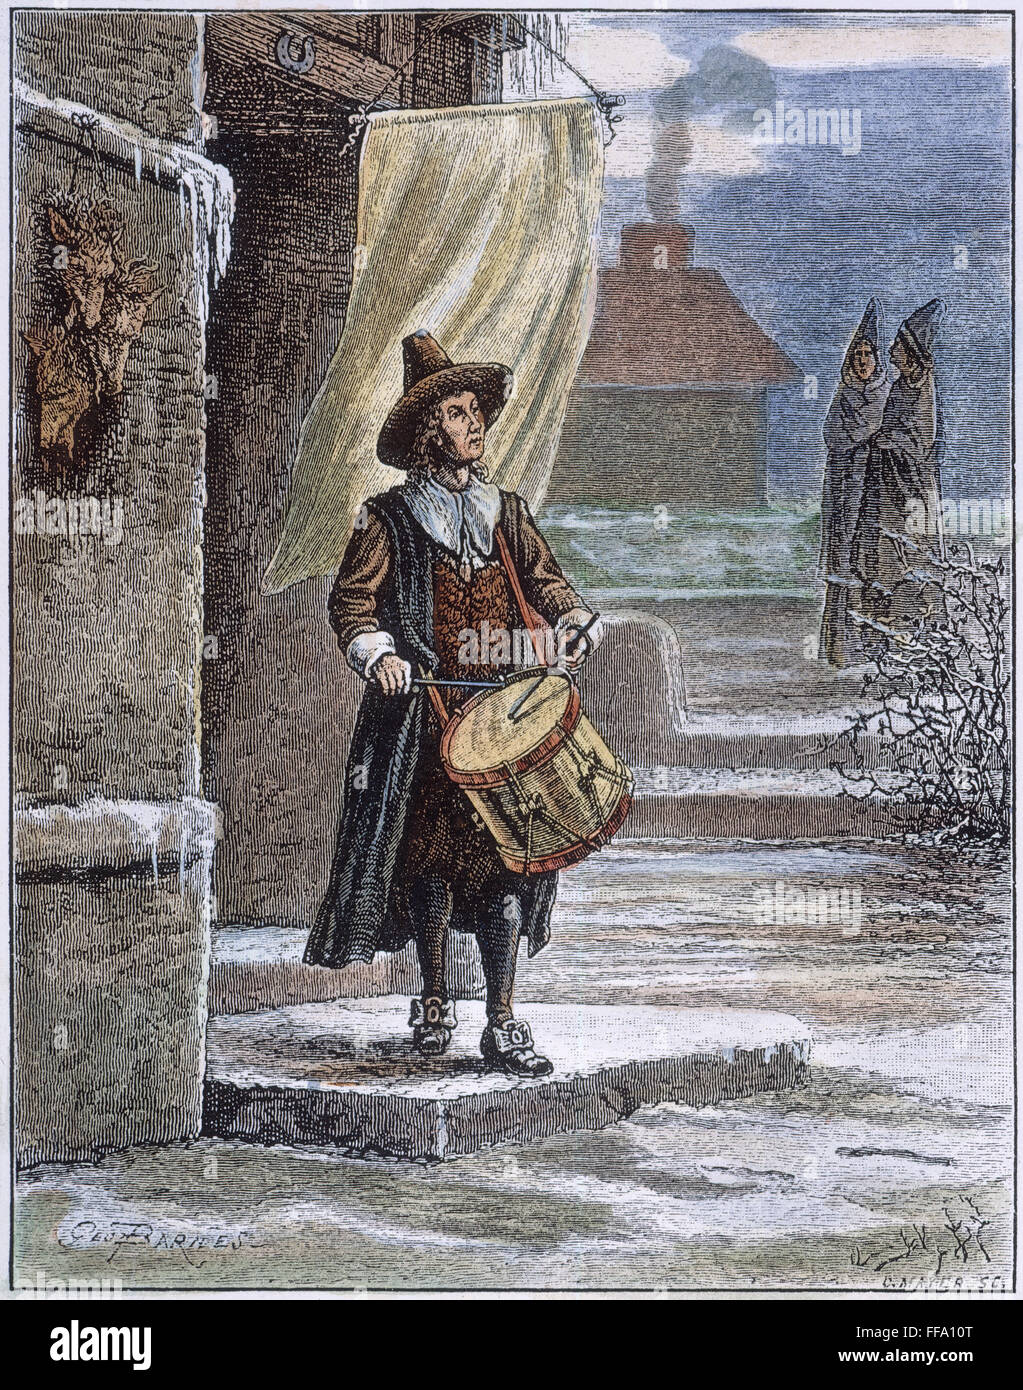 PURITAN CHURCH DRUMMER. /nIn the absence of church bells, a drummer in 17th century New England summons Puritans to service. Wood engraving, 19th century. Stock Photo